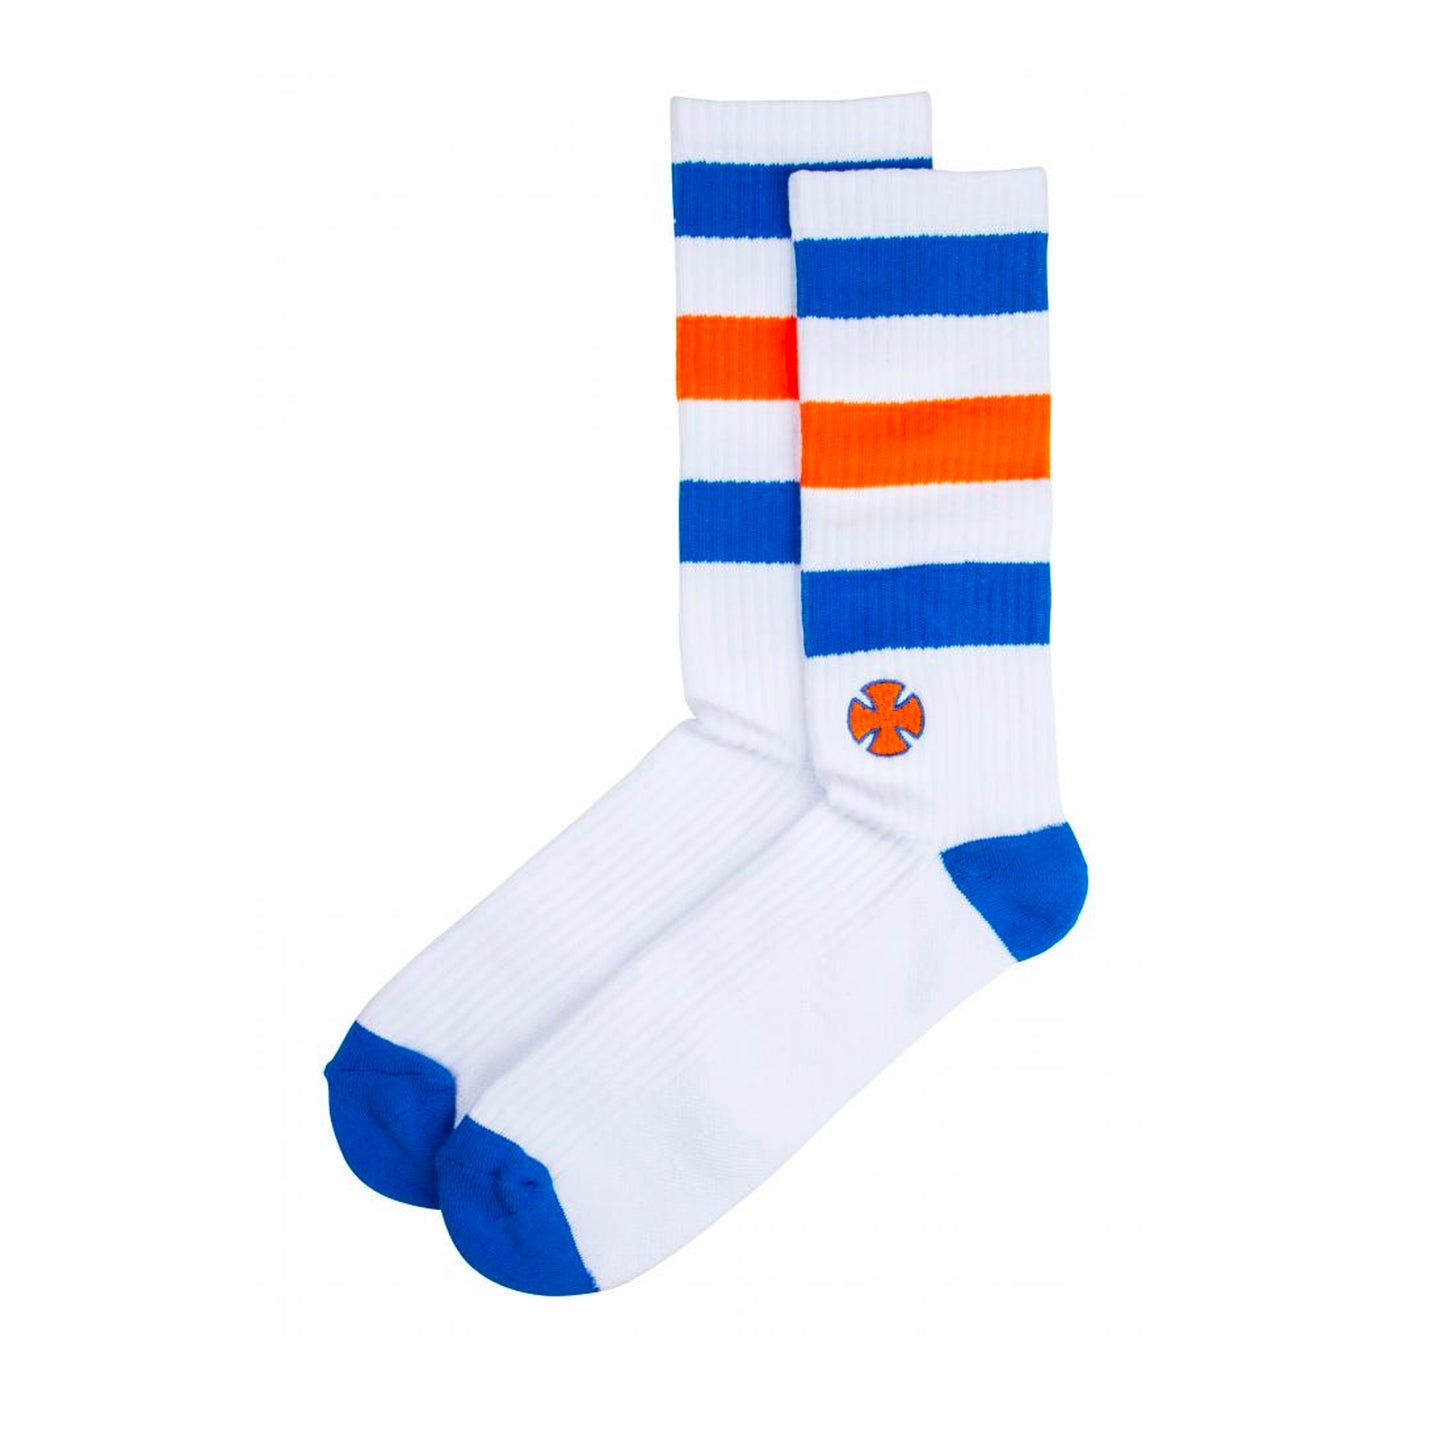 Independent Sock Trip Sock - White/Blue - Prime Delux Store